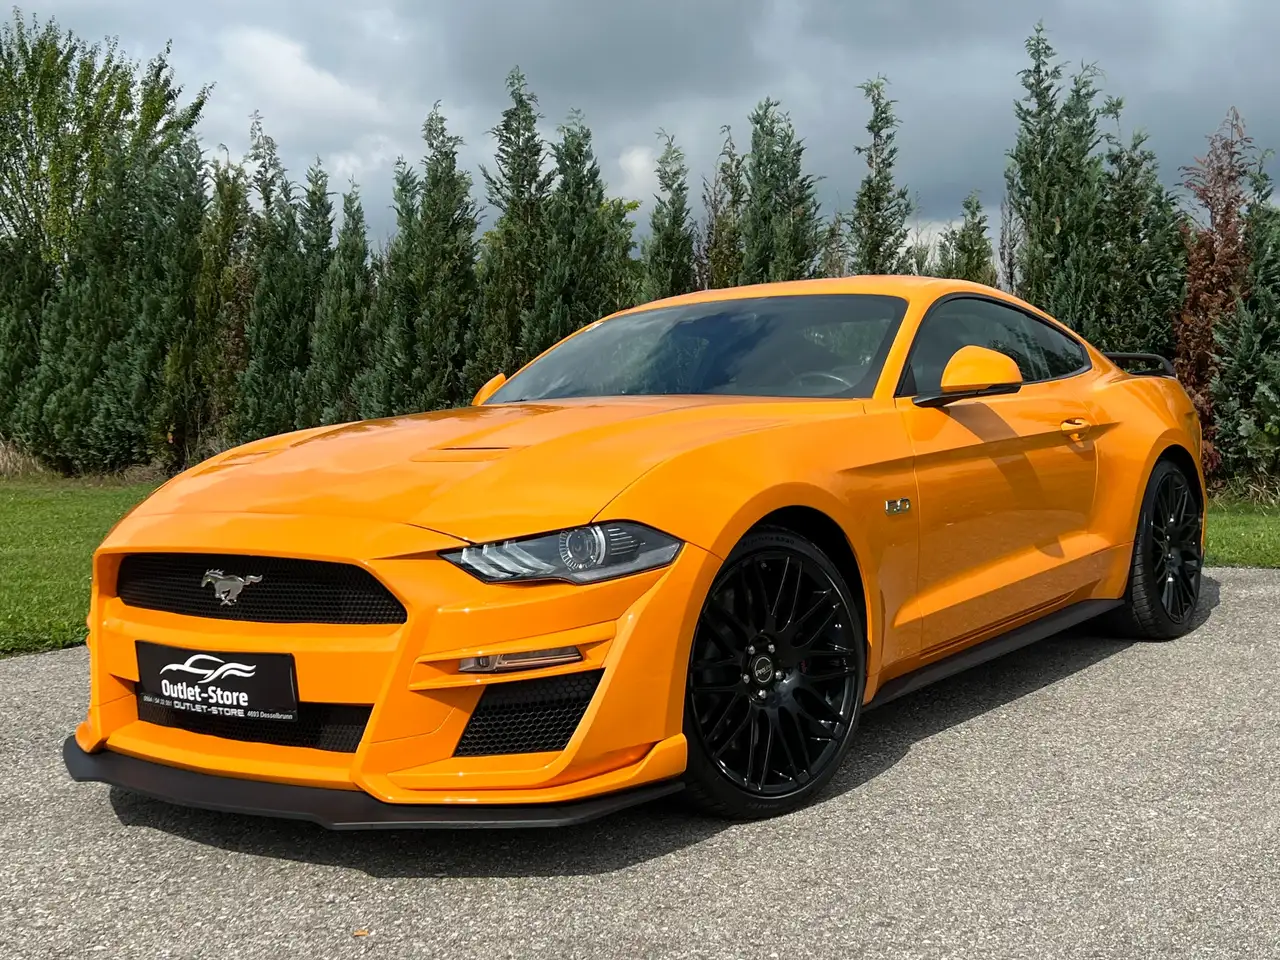 2018 - Ford Mustang Mustang Boîte automatique Coupé